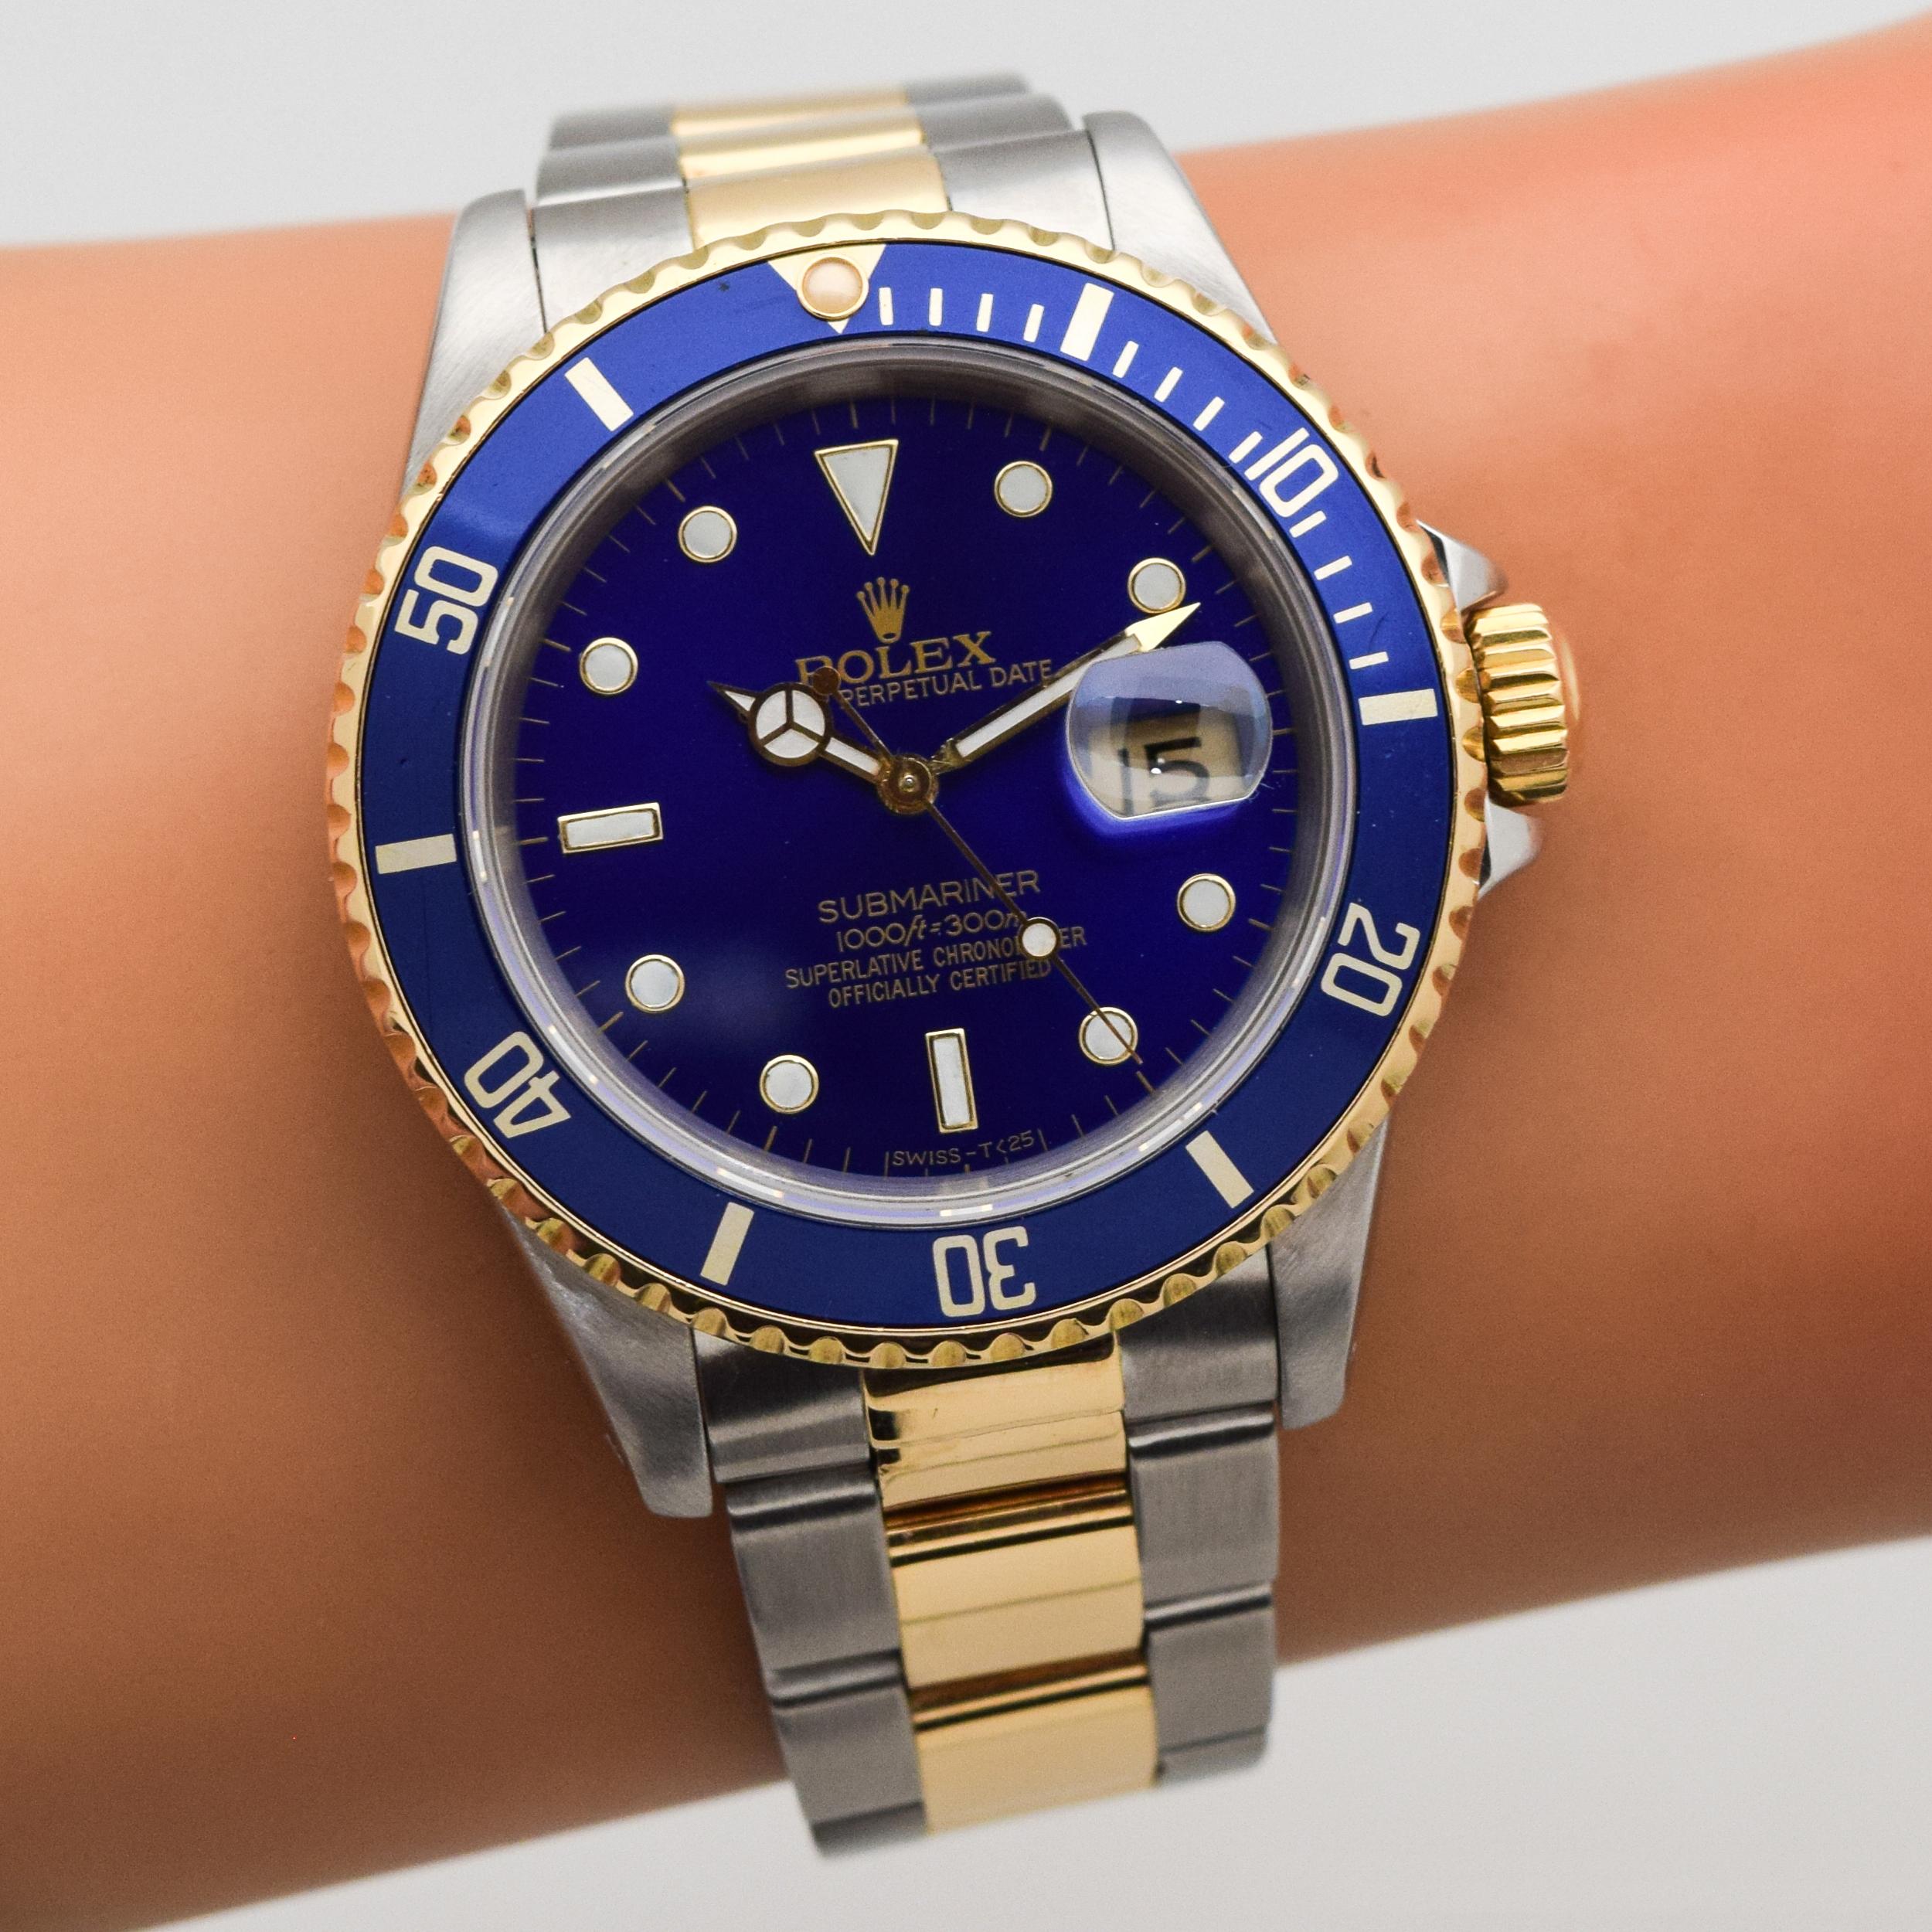 Vintage Rolex Blue Submariner Reference 16613 Two-Tone Watch, 1989 4